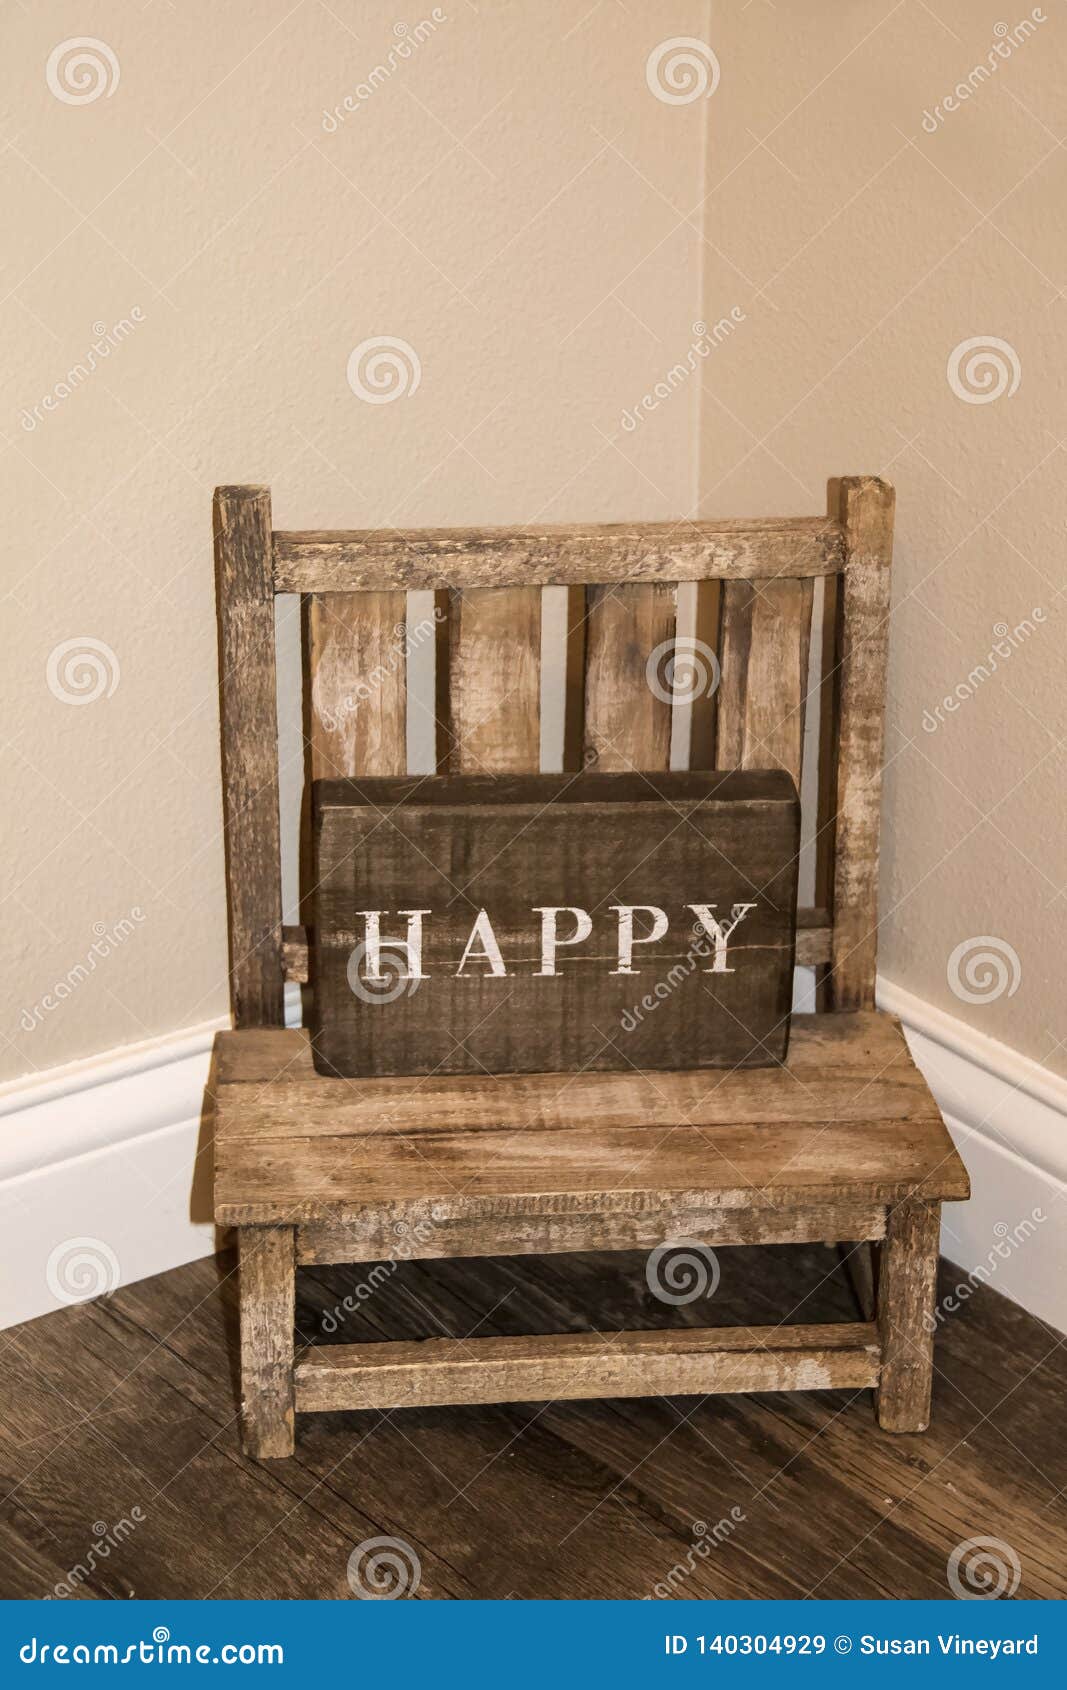 Small Childs Rustic Wooden Chair Sitting In The Corner Of A Room